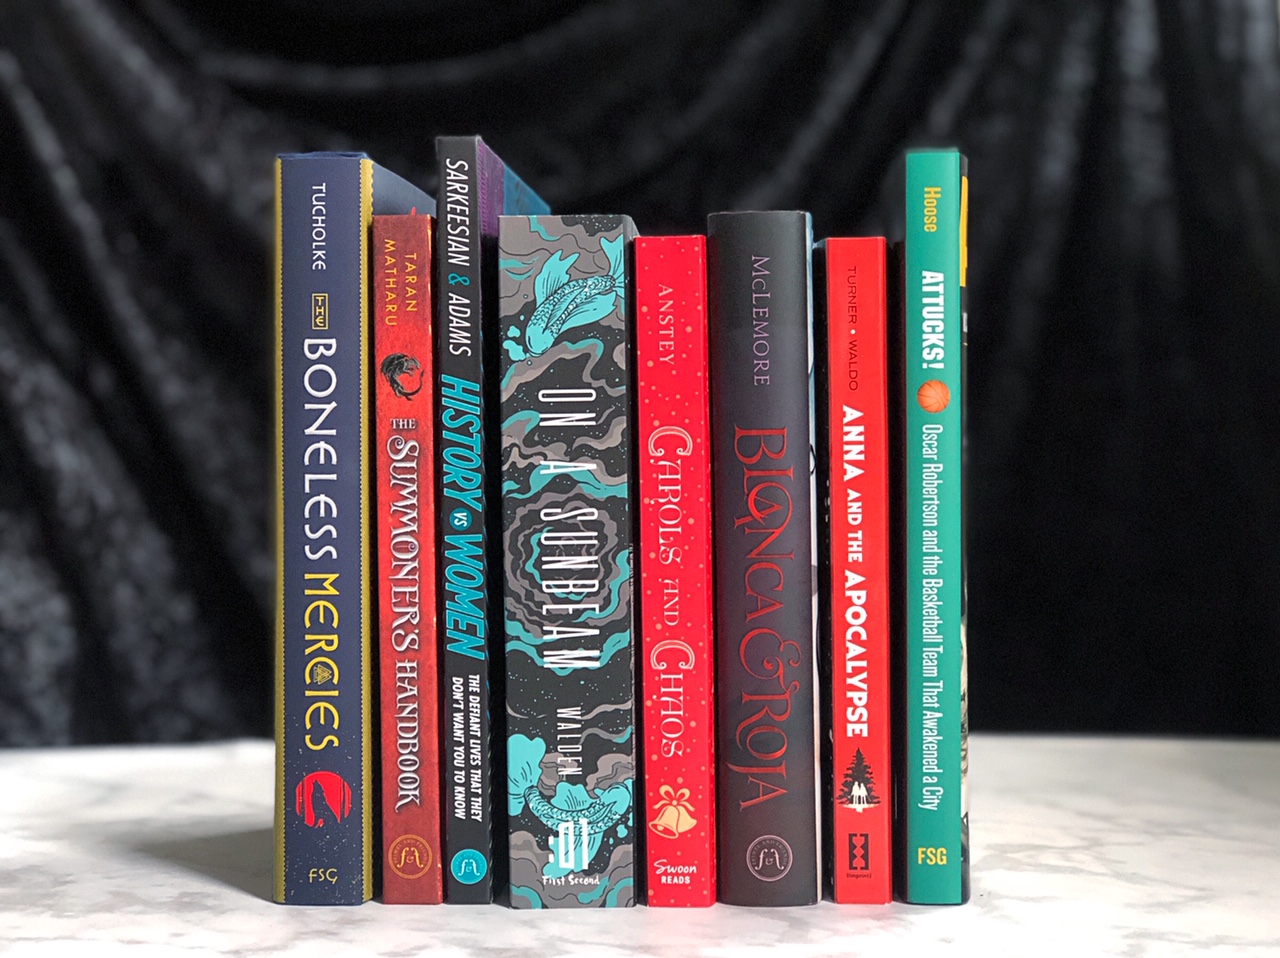 9 New Books for Your TBR This October!